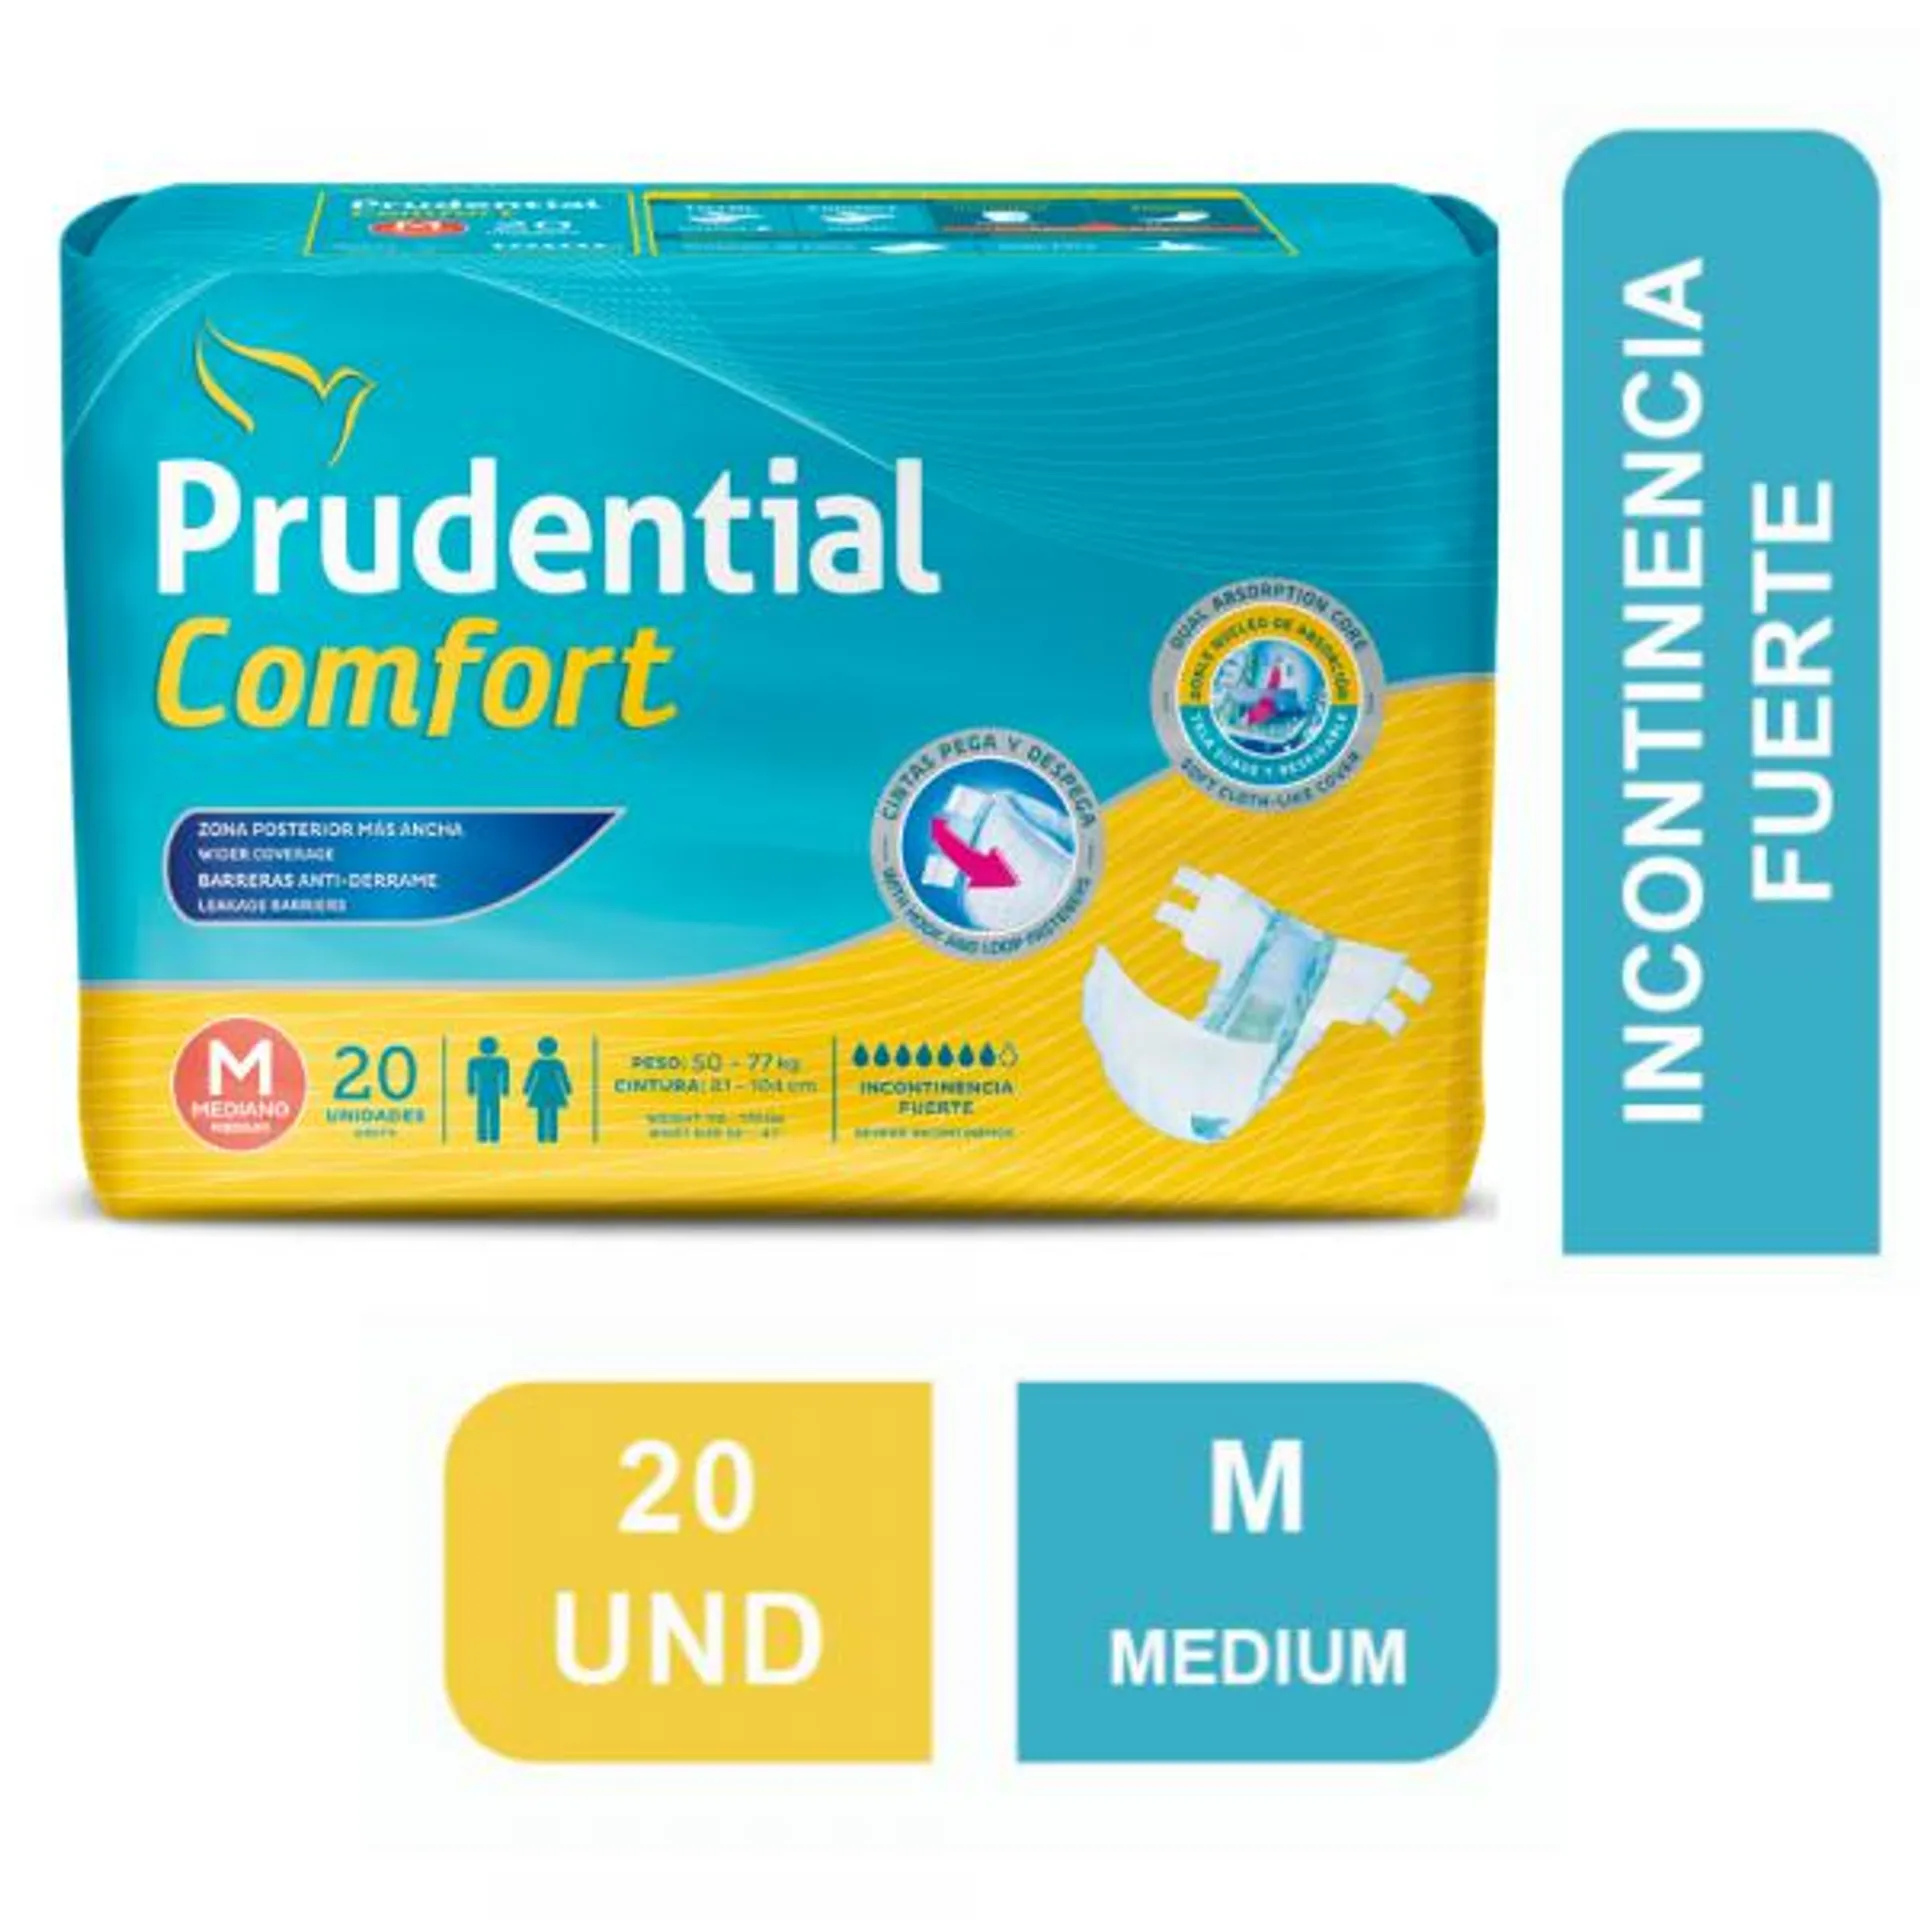 Pañales para Adulto PRUDENTIAL Comfort Mediano x 20unds